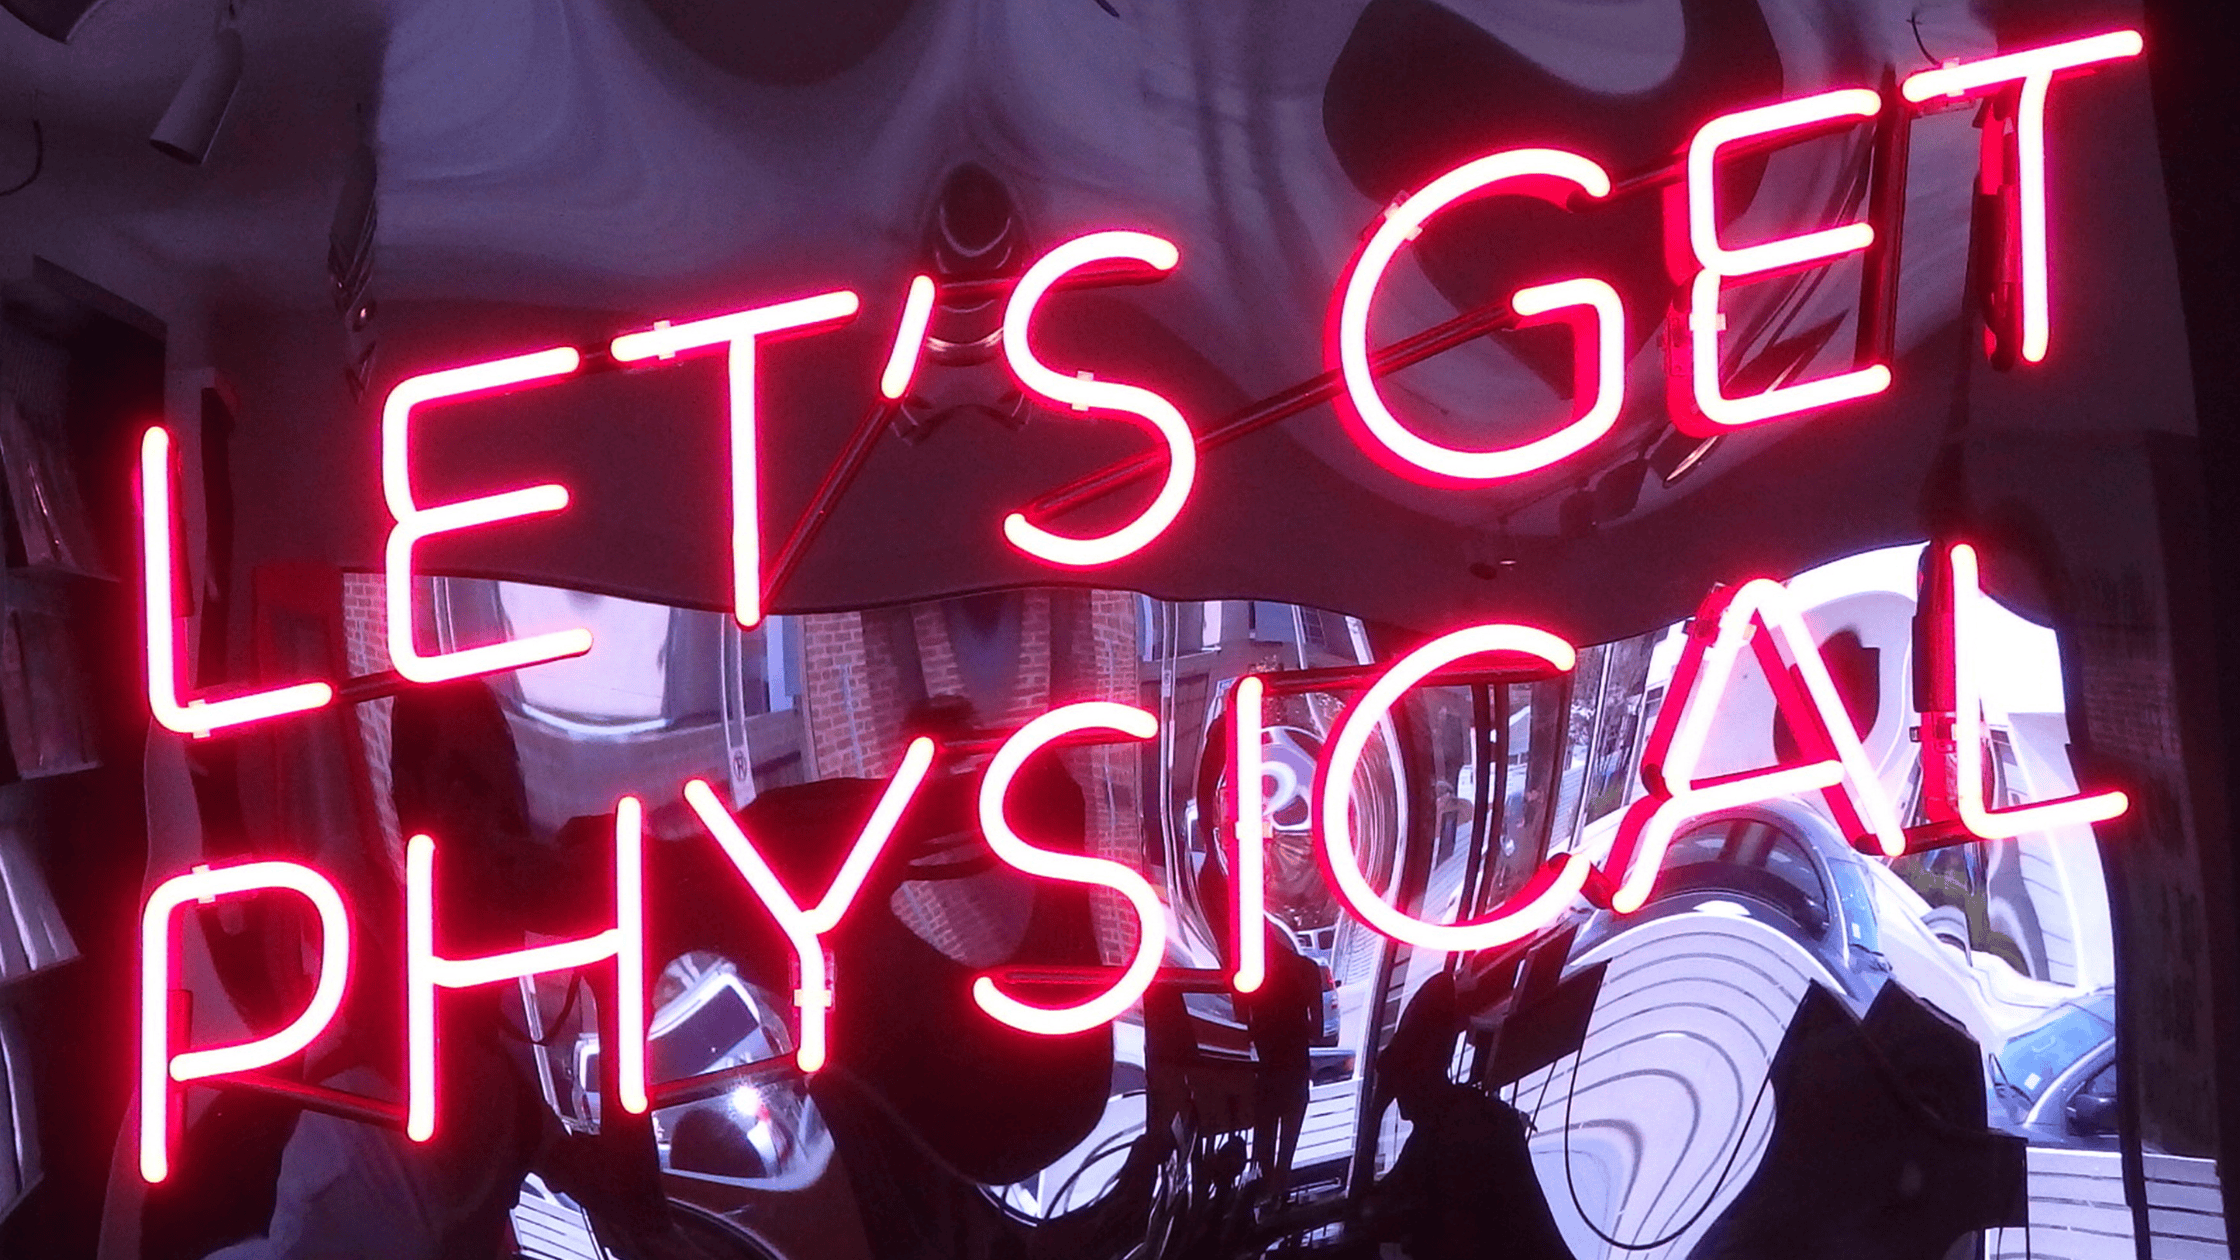 a neon sign that says "let's get physical"